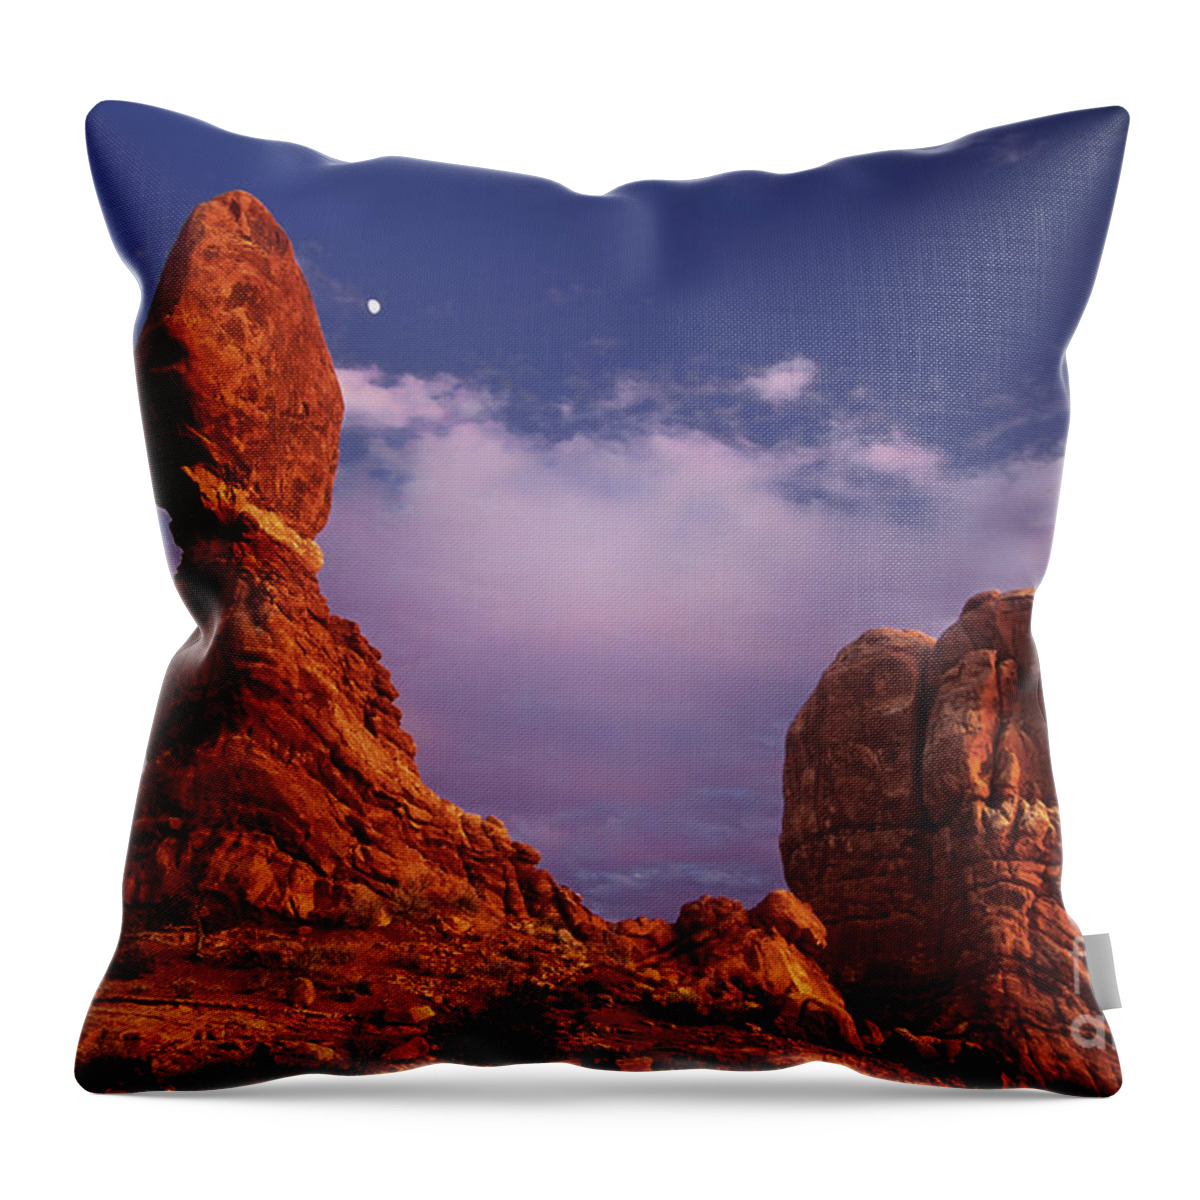 Arches National Park Throw Pillow featuring the photograph Moonrise At Balanced Rock Arches National Park Utah by Dave Welling